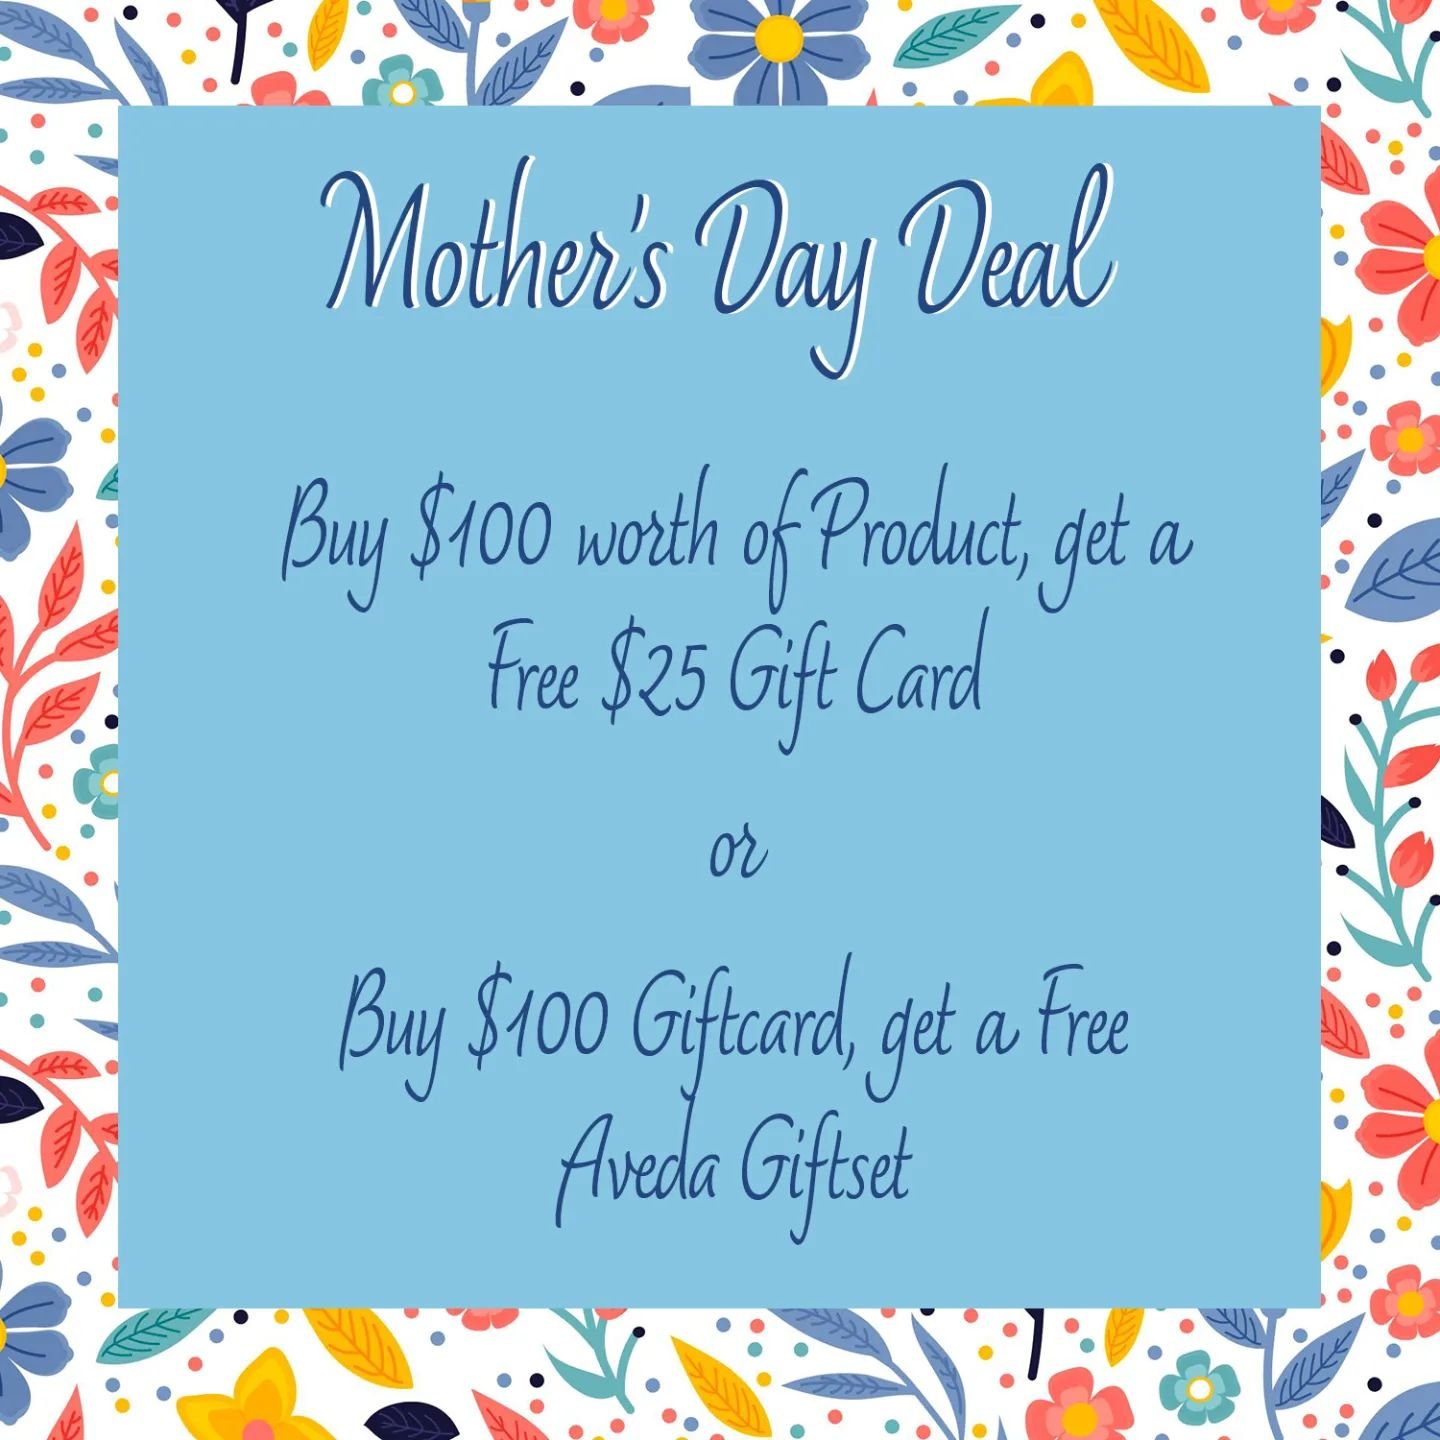 Our Mother's Day Deal is going on all week! Stop by to get a gift you know your mom will love ❤️